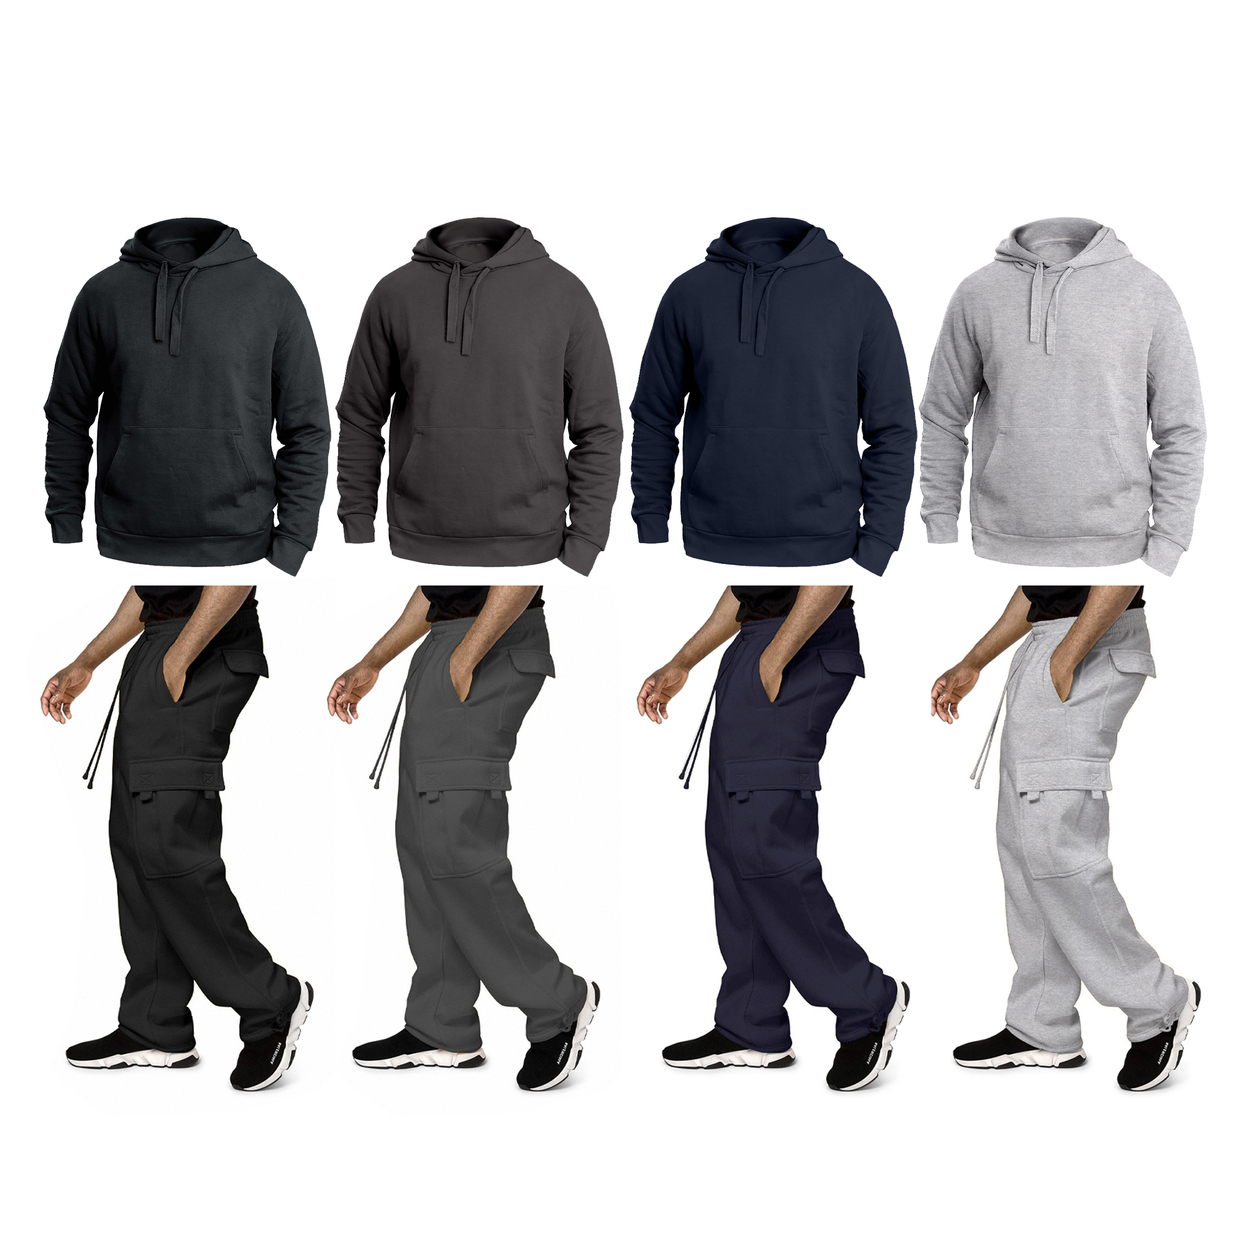 Multi-Pack: Big & Tall Men's Winter Warm Cozy Athletic Fleece Lined Multi-Pocket Cargo Sweatsuit - Navy, 1-pack, Small